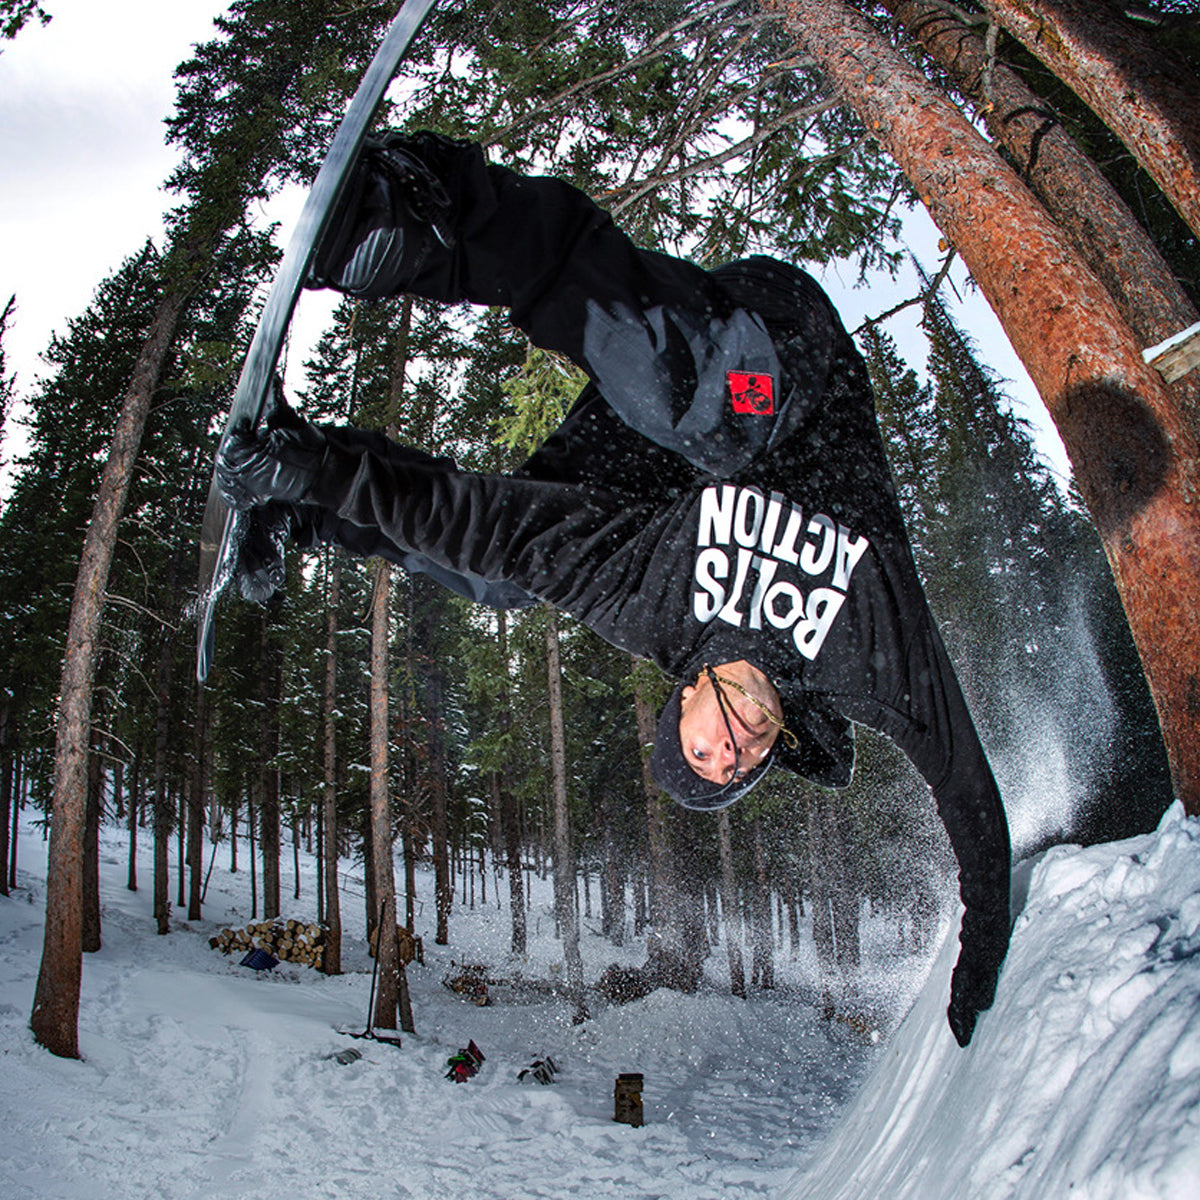 Jeremy Jones doing a hand plant on his snowboard in the woods.